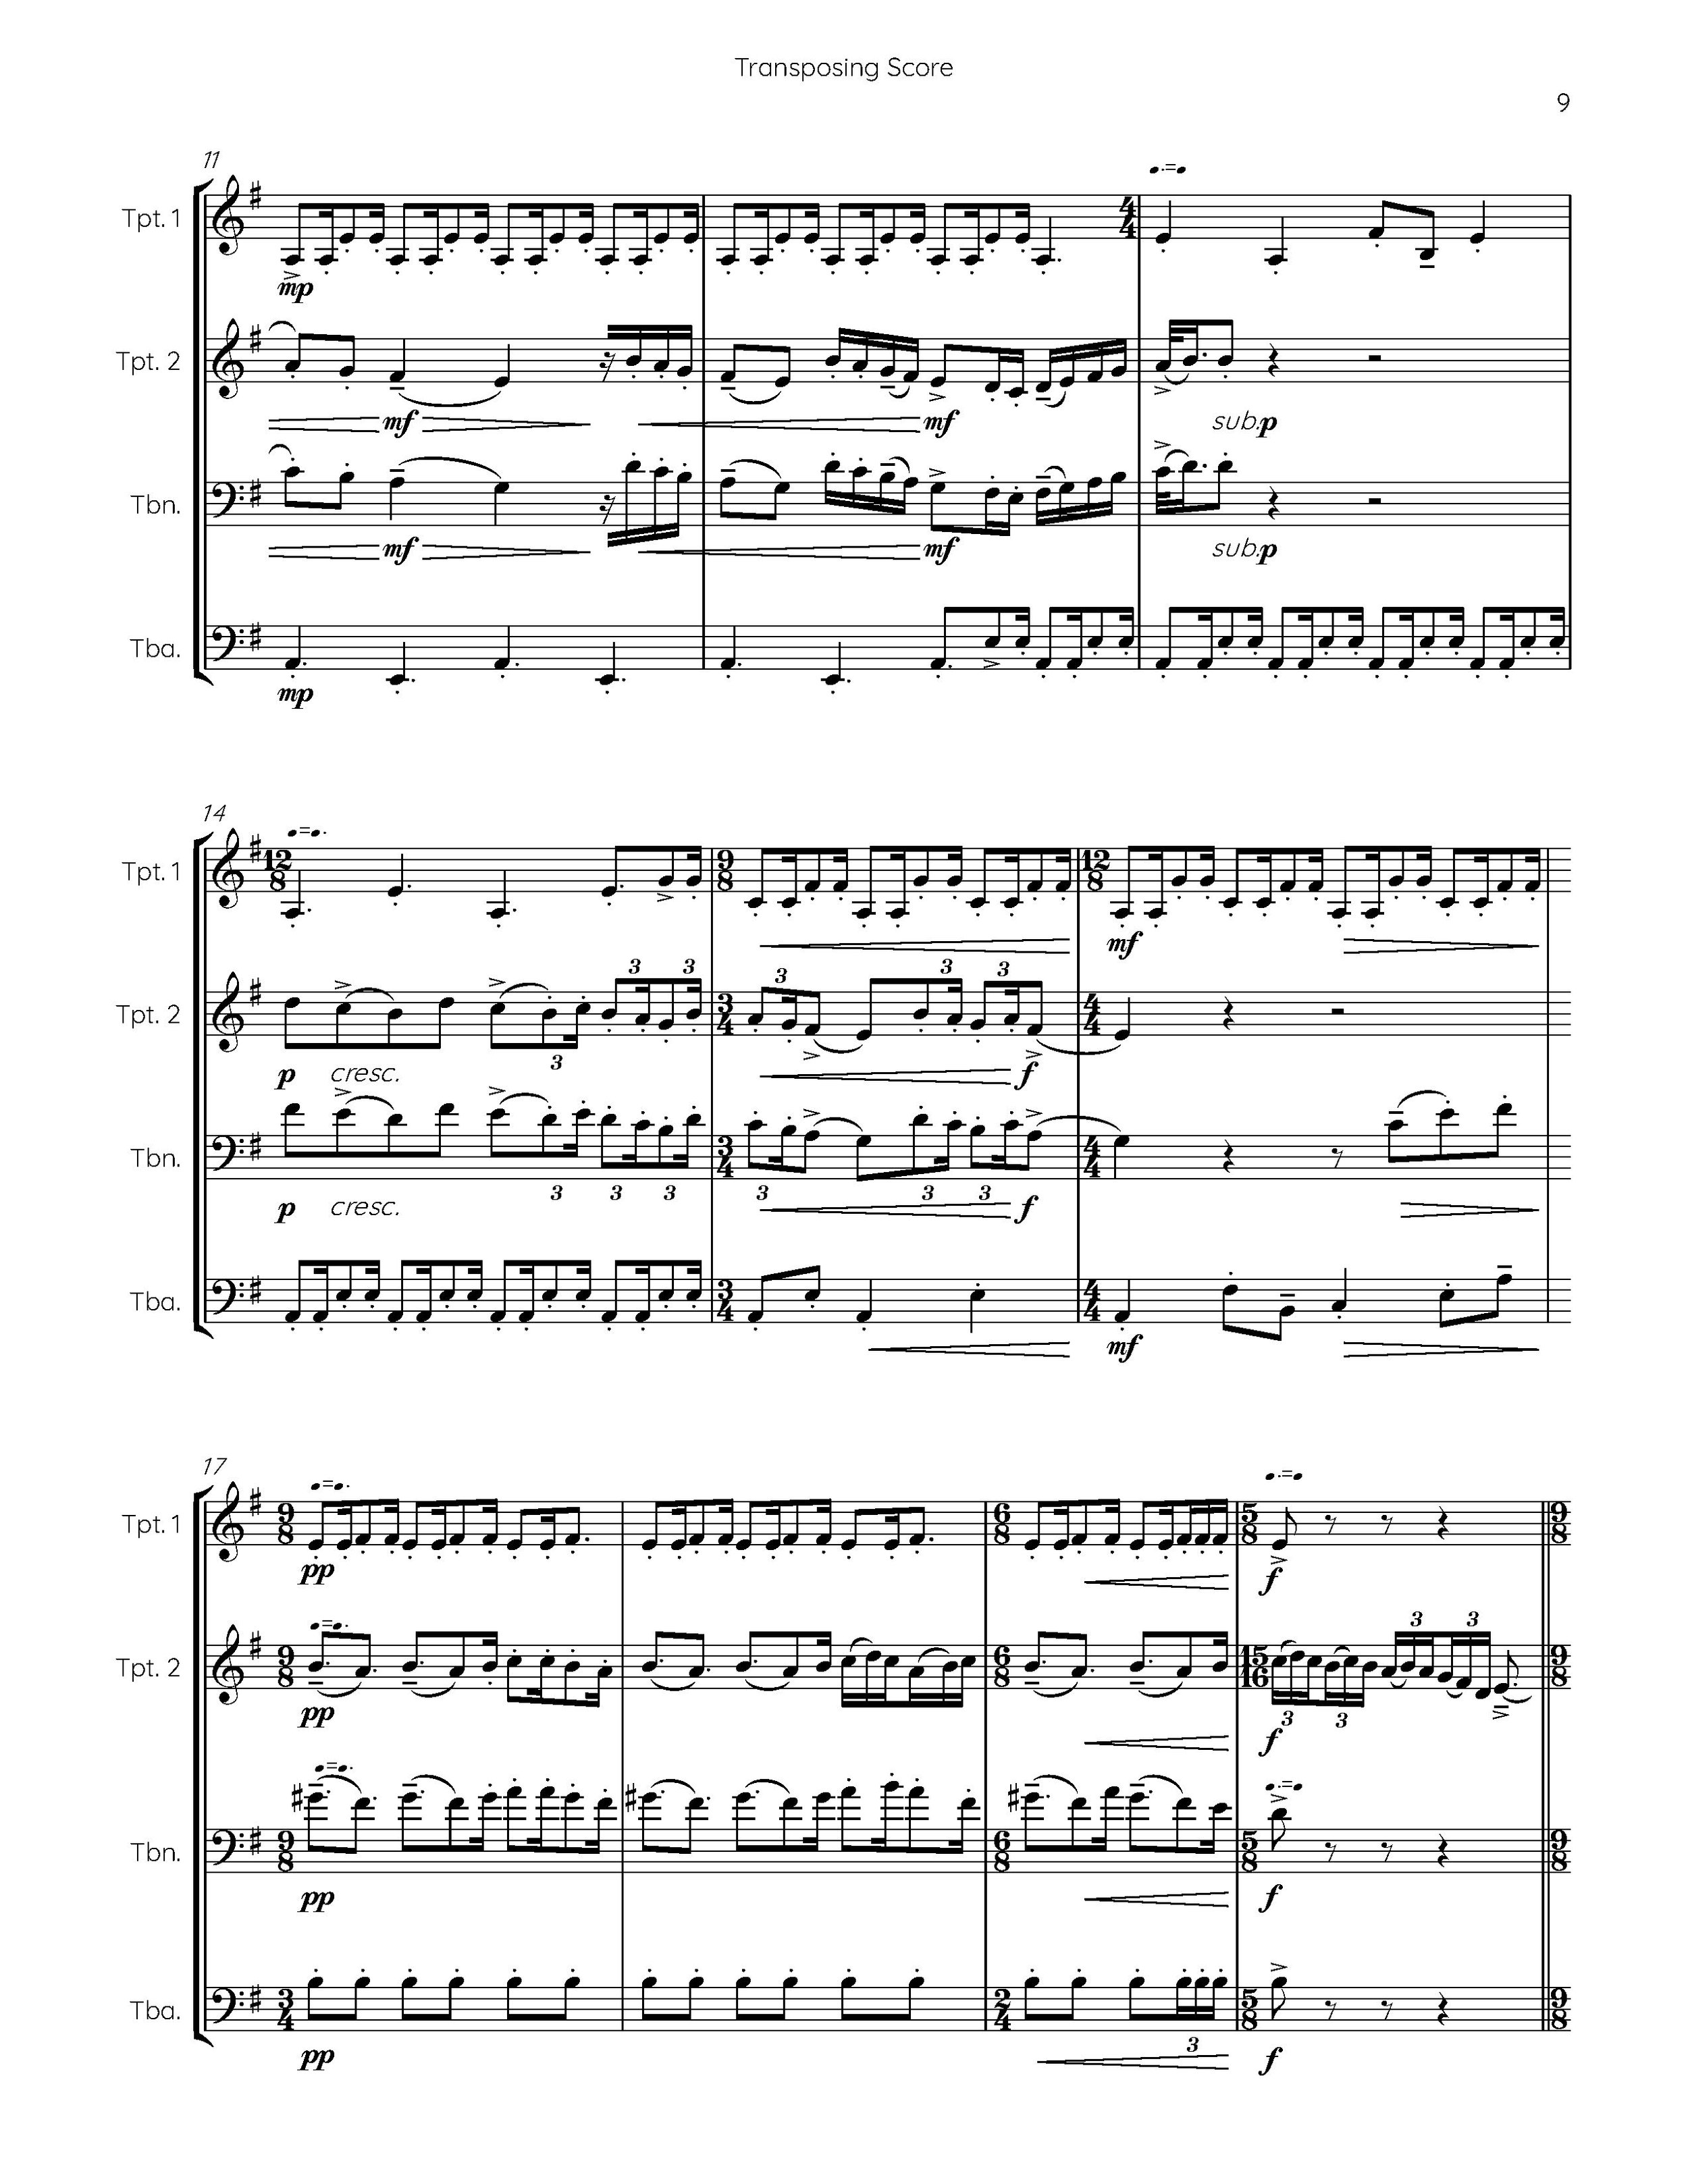 v1.2 Journey to the Ends of the World I. Horn Call - Transposing Score_Page_09.jpg